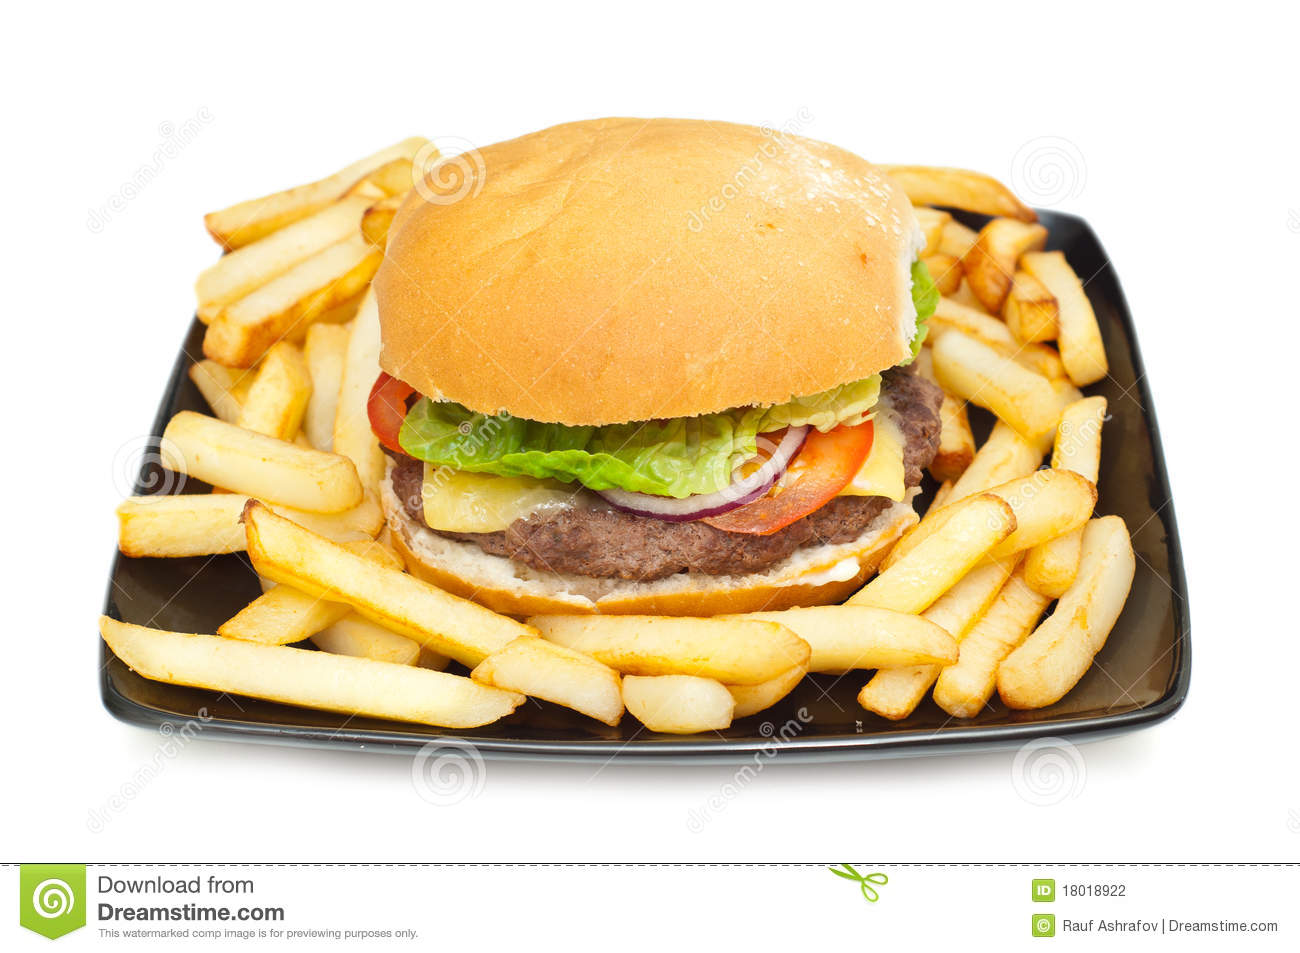 Burger And Chips On A Plate Stock Photography   Image  18018922